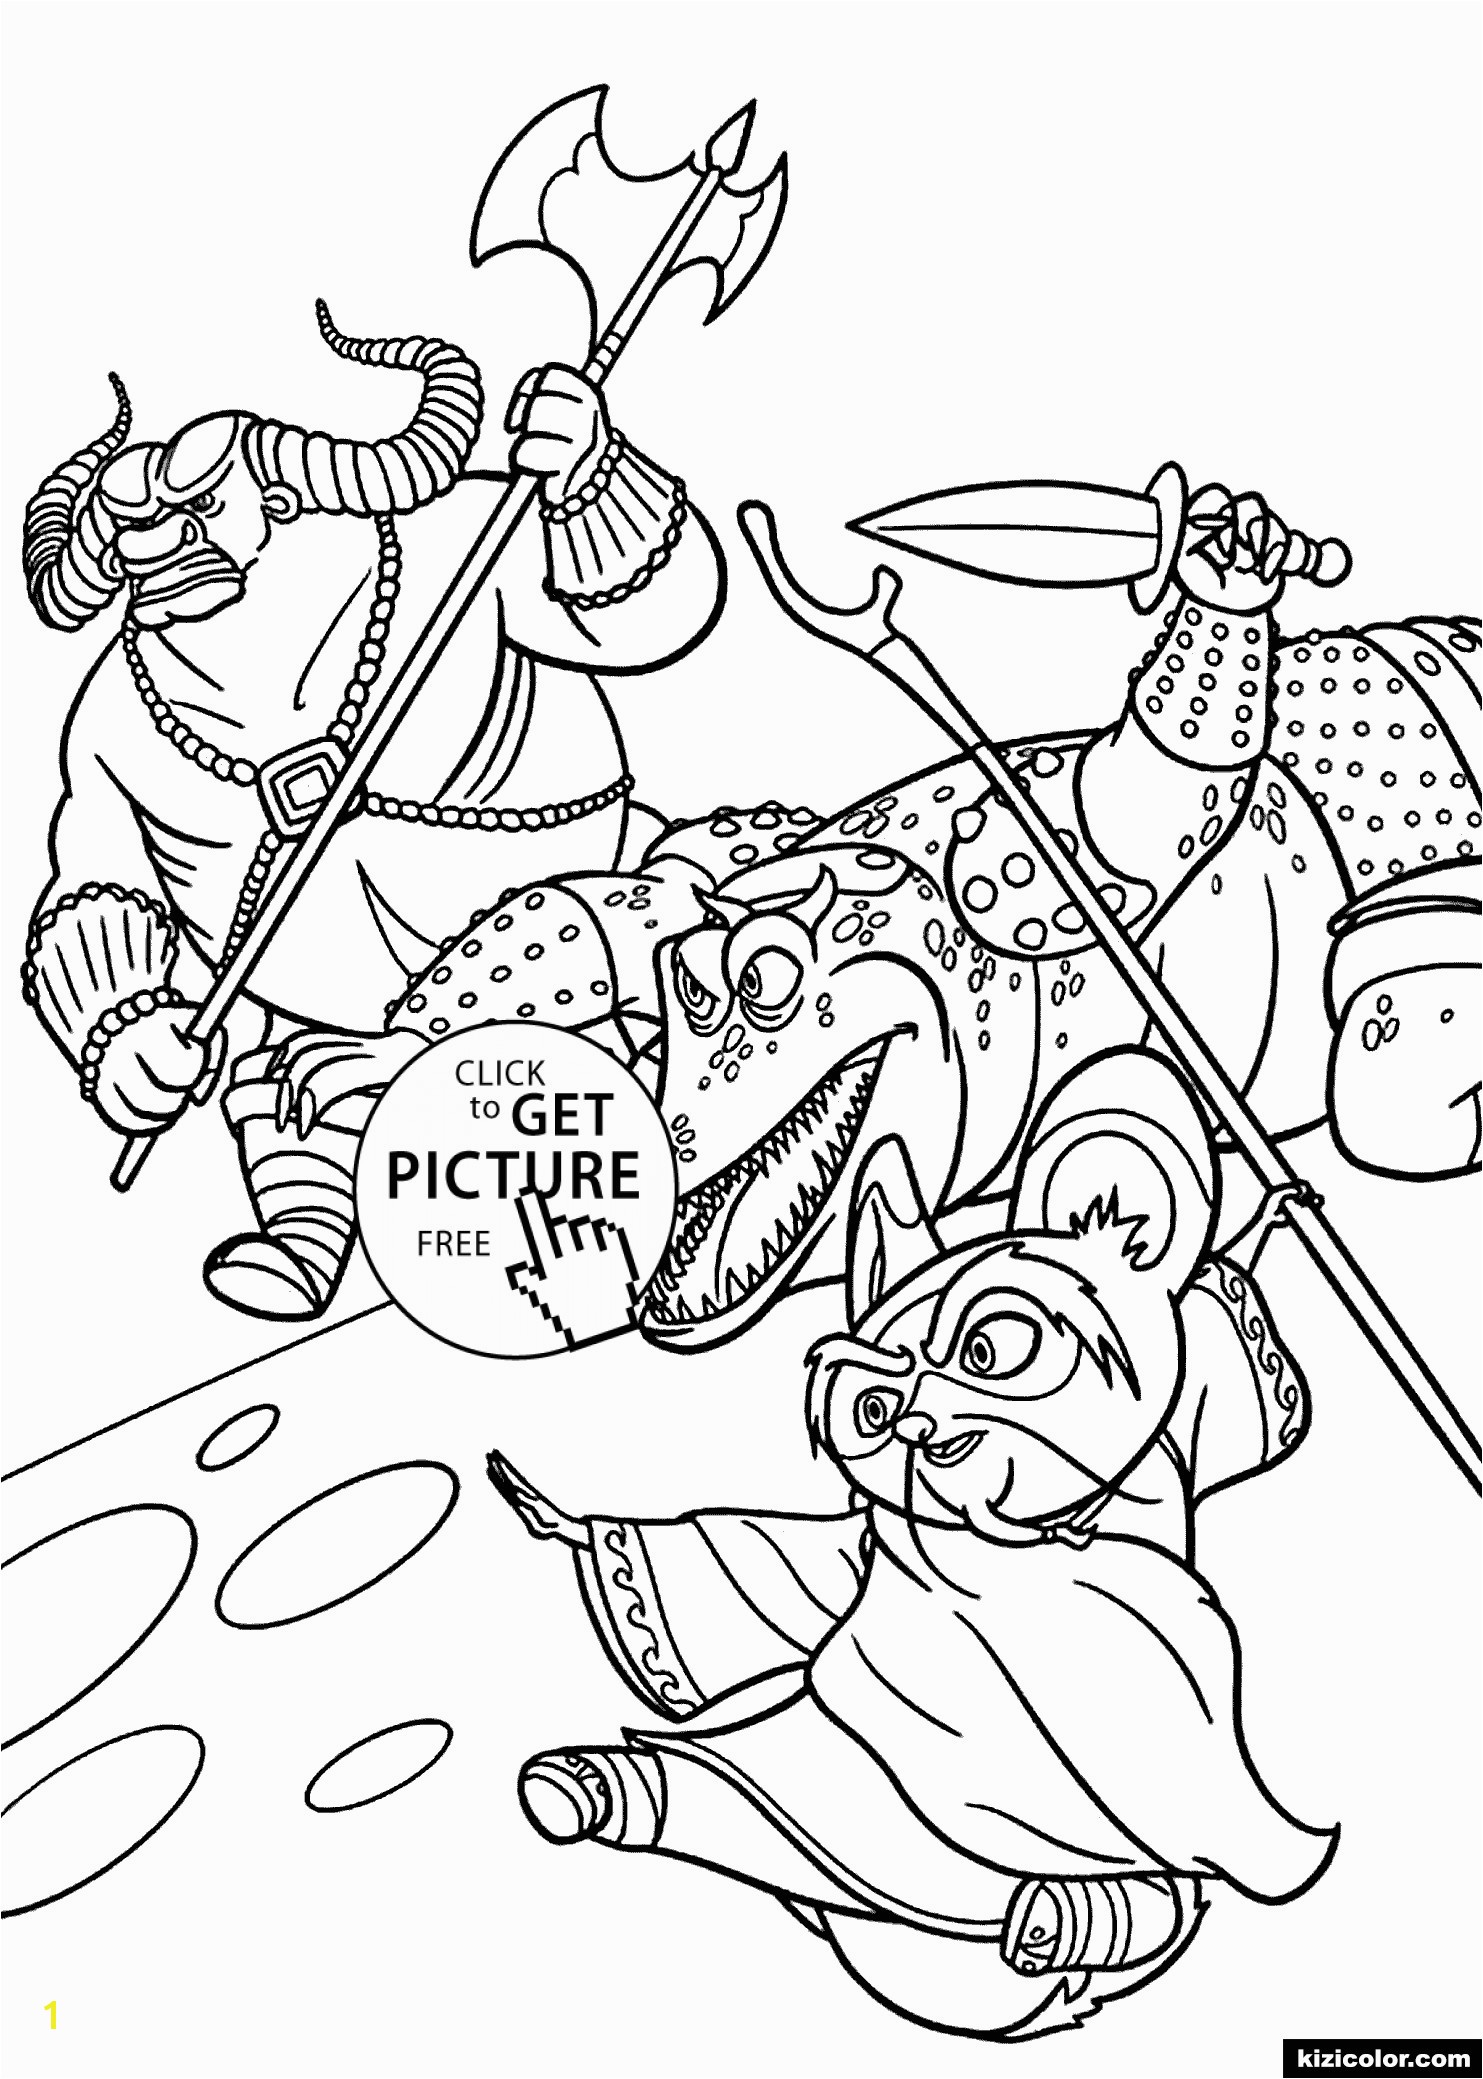 PRINT THIS COLORING PAGE